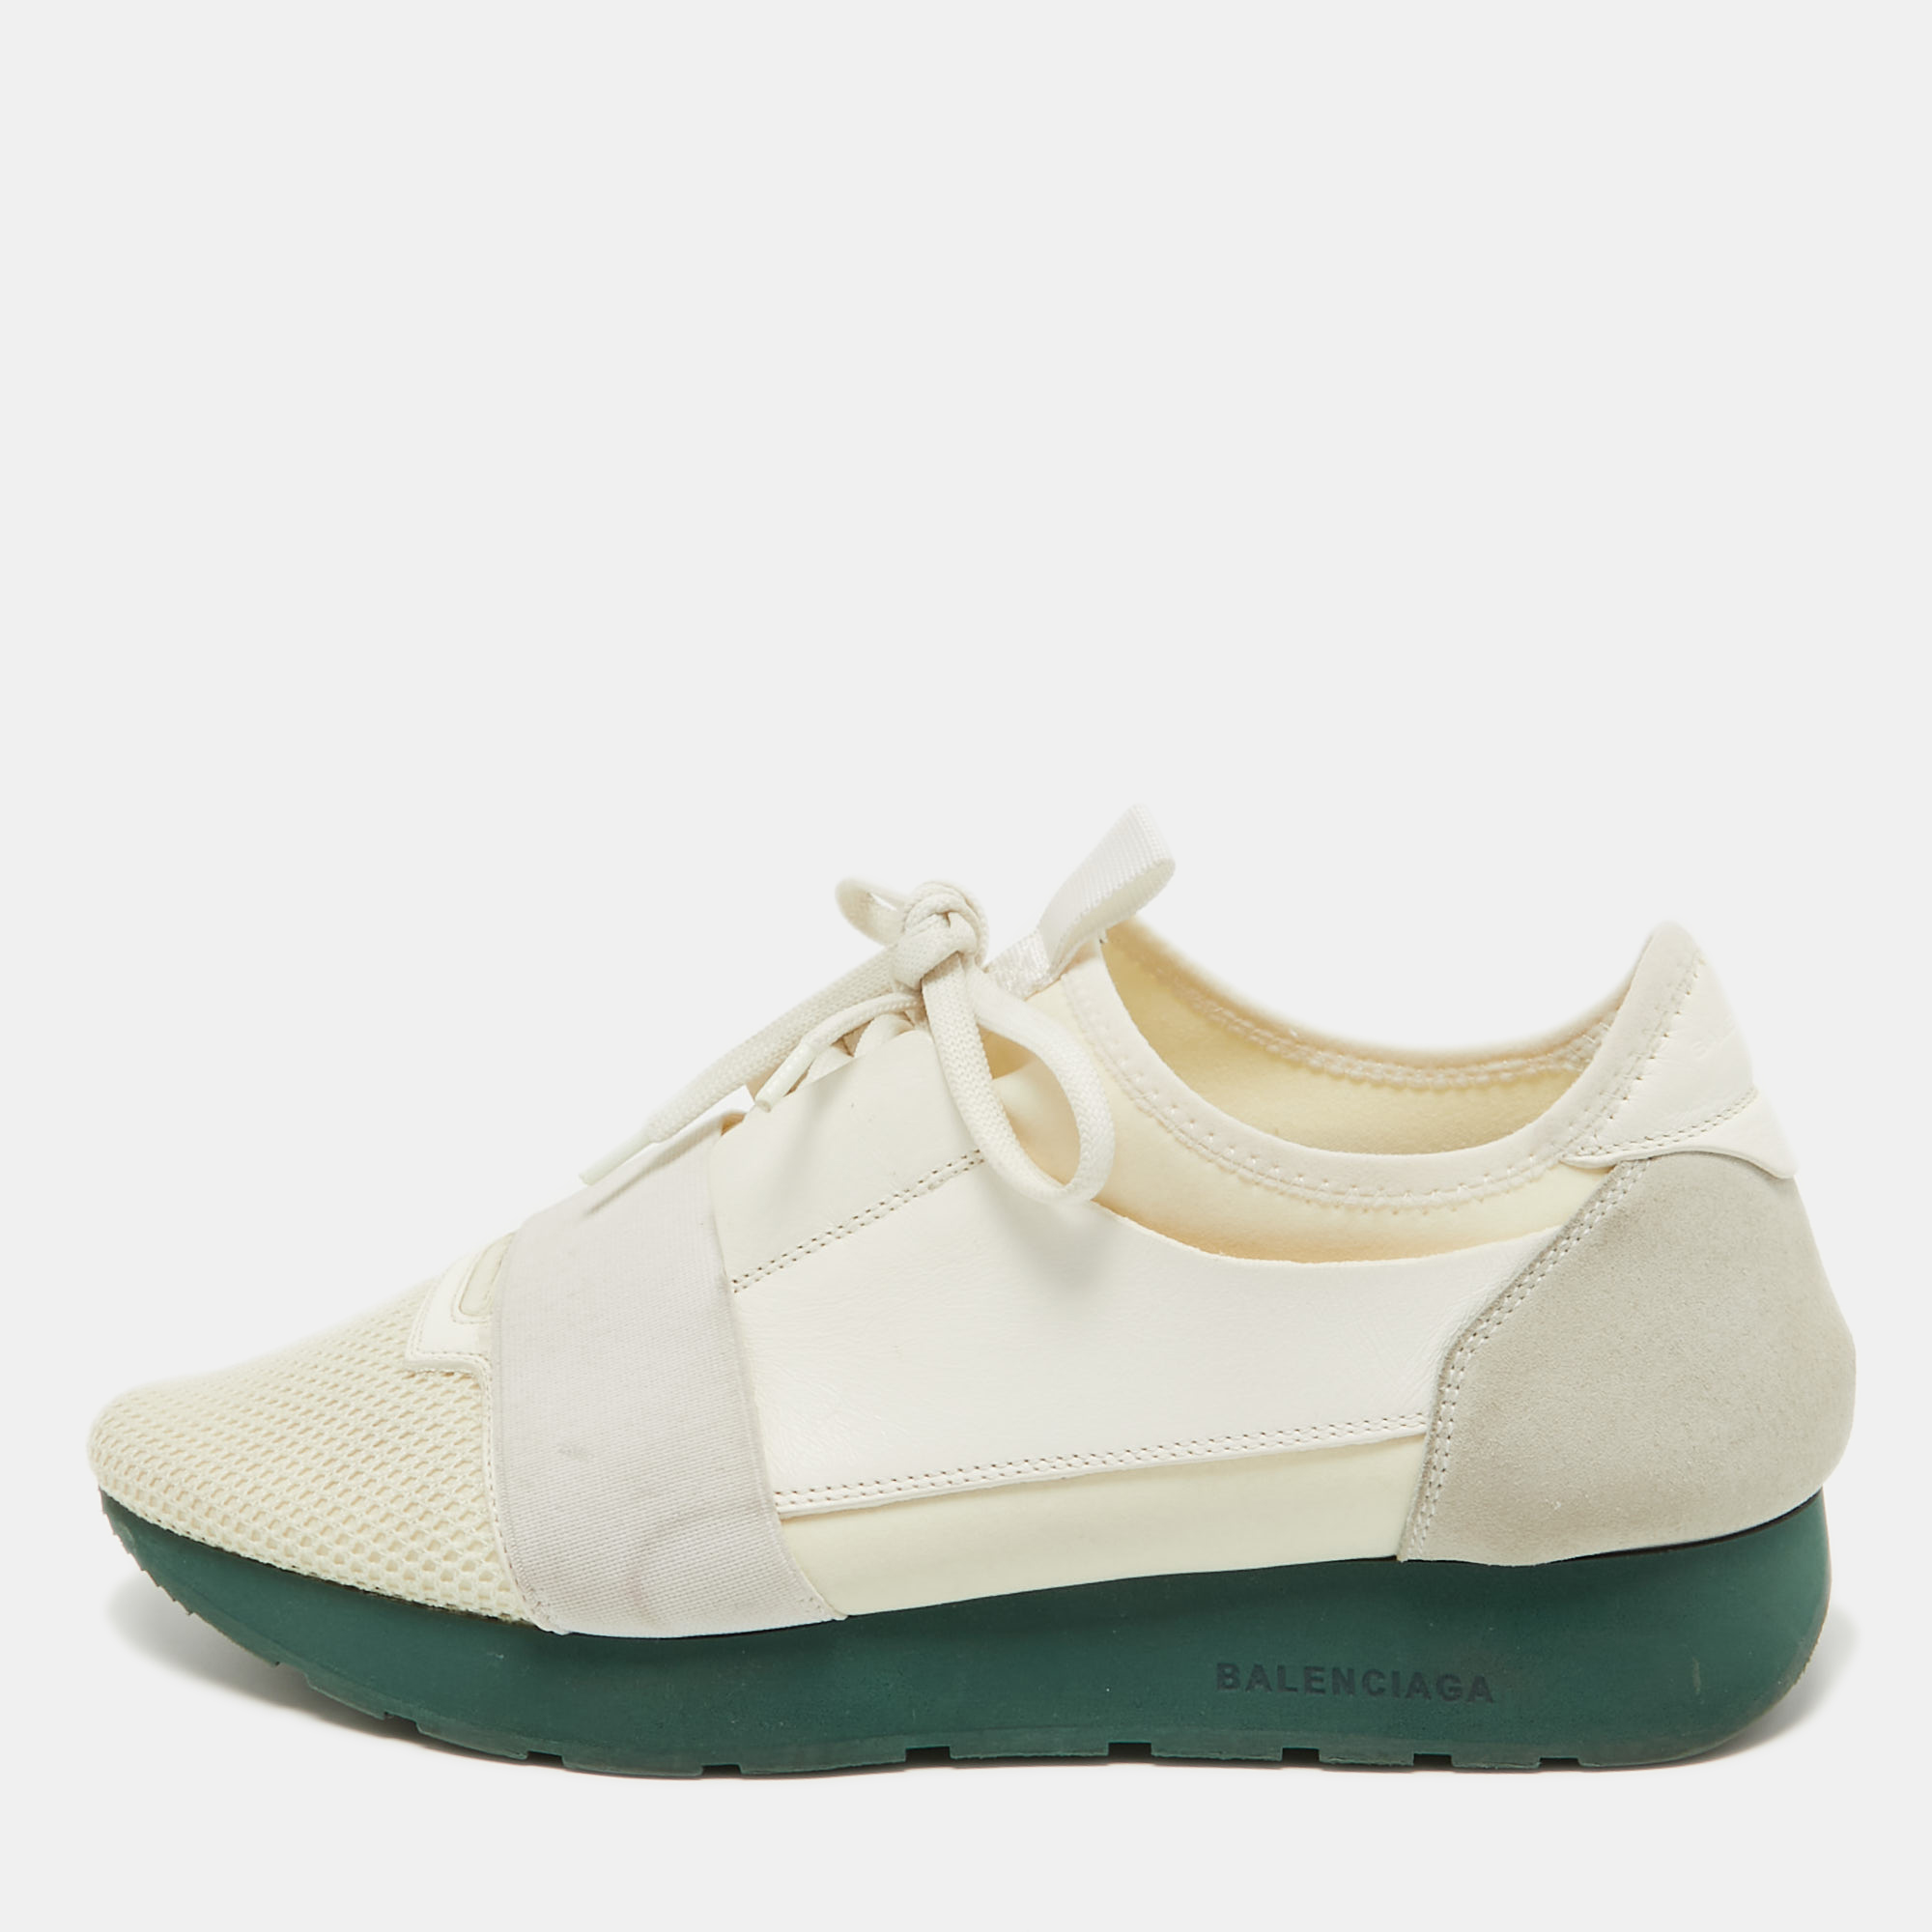 Give your outfit a luxe update with this pair of Balenciaga sneakers. The shoes are sewn perfectly to help you make a statement in them for a long time.